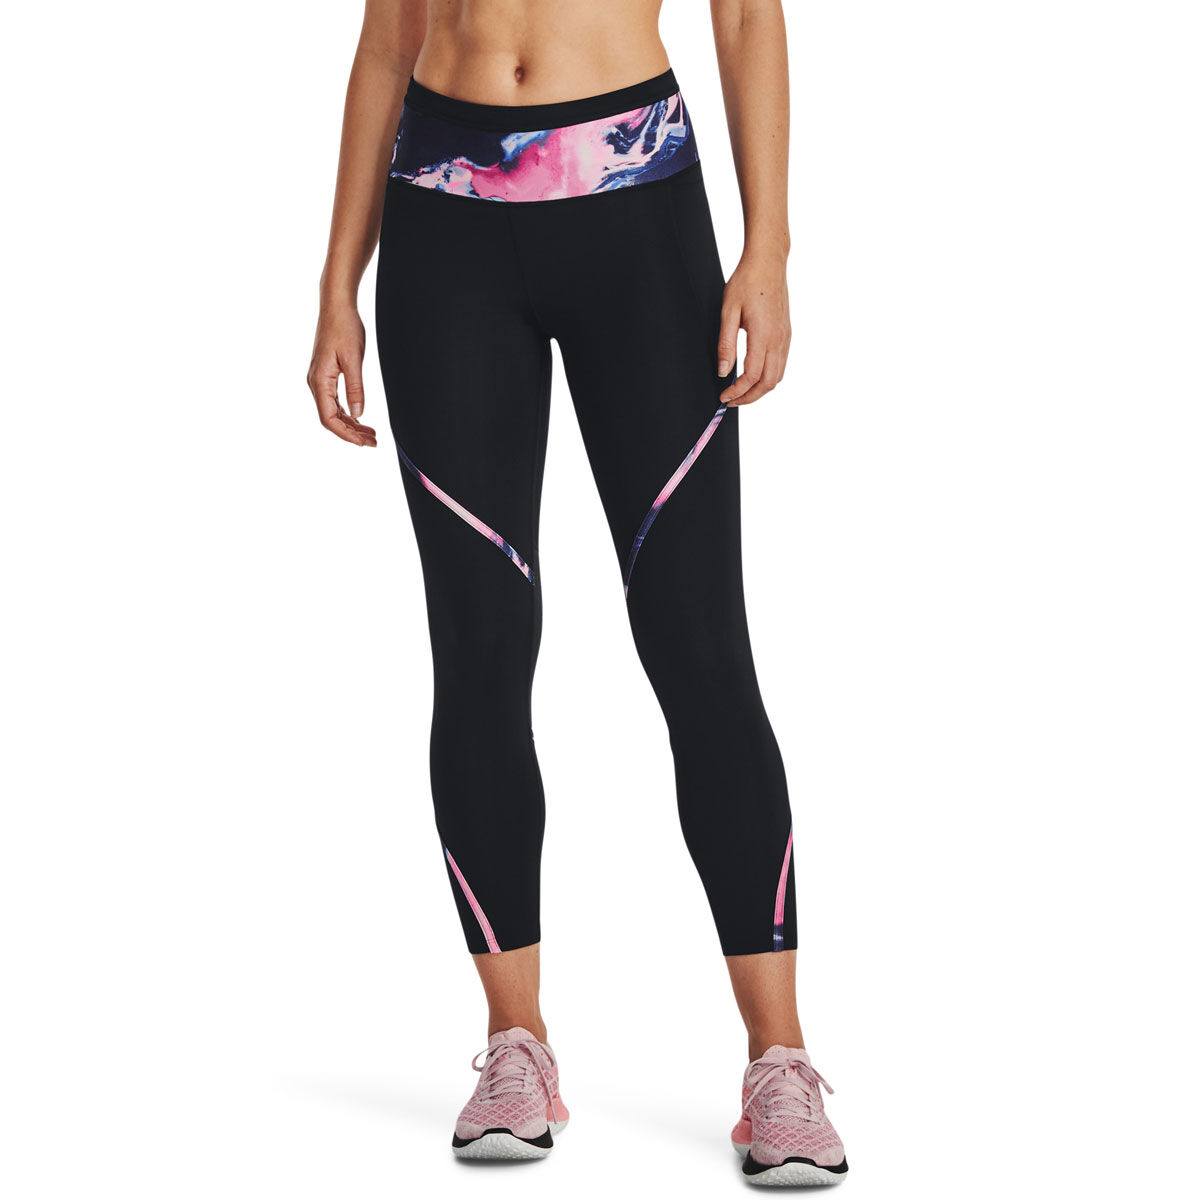  Under Armour Women's UA Run Anywhere Ankle Tights